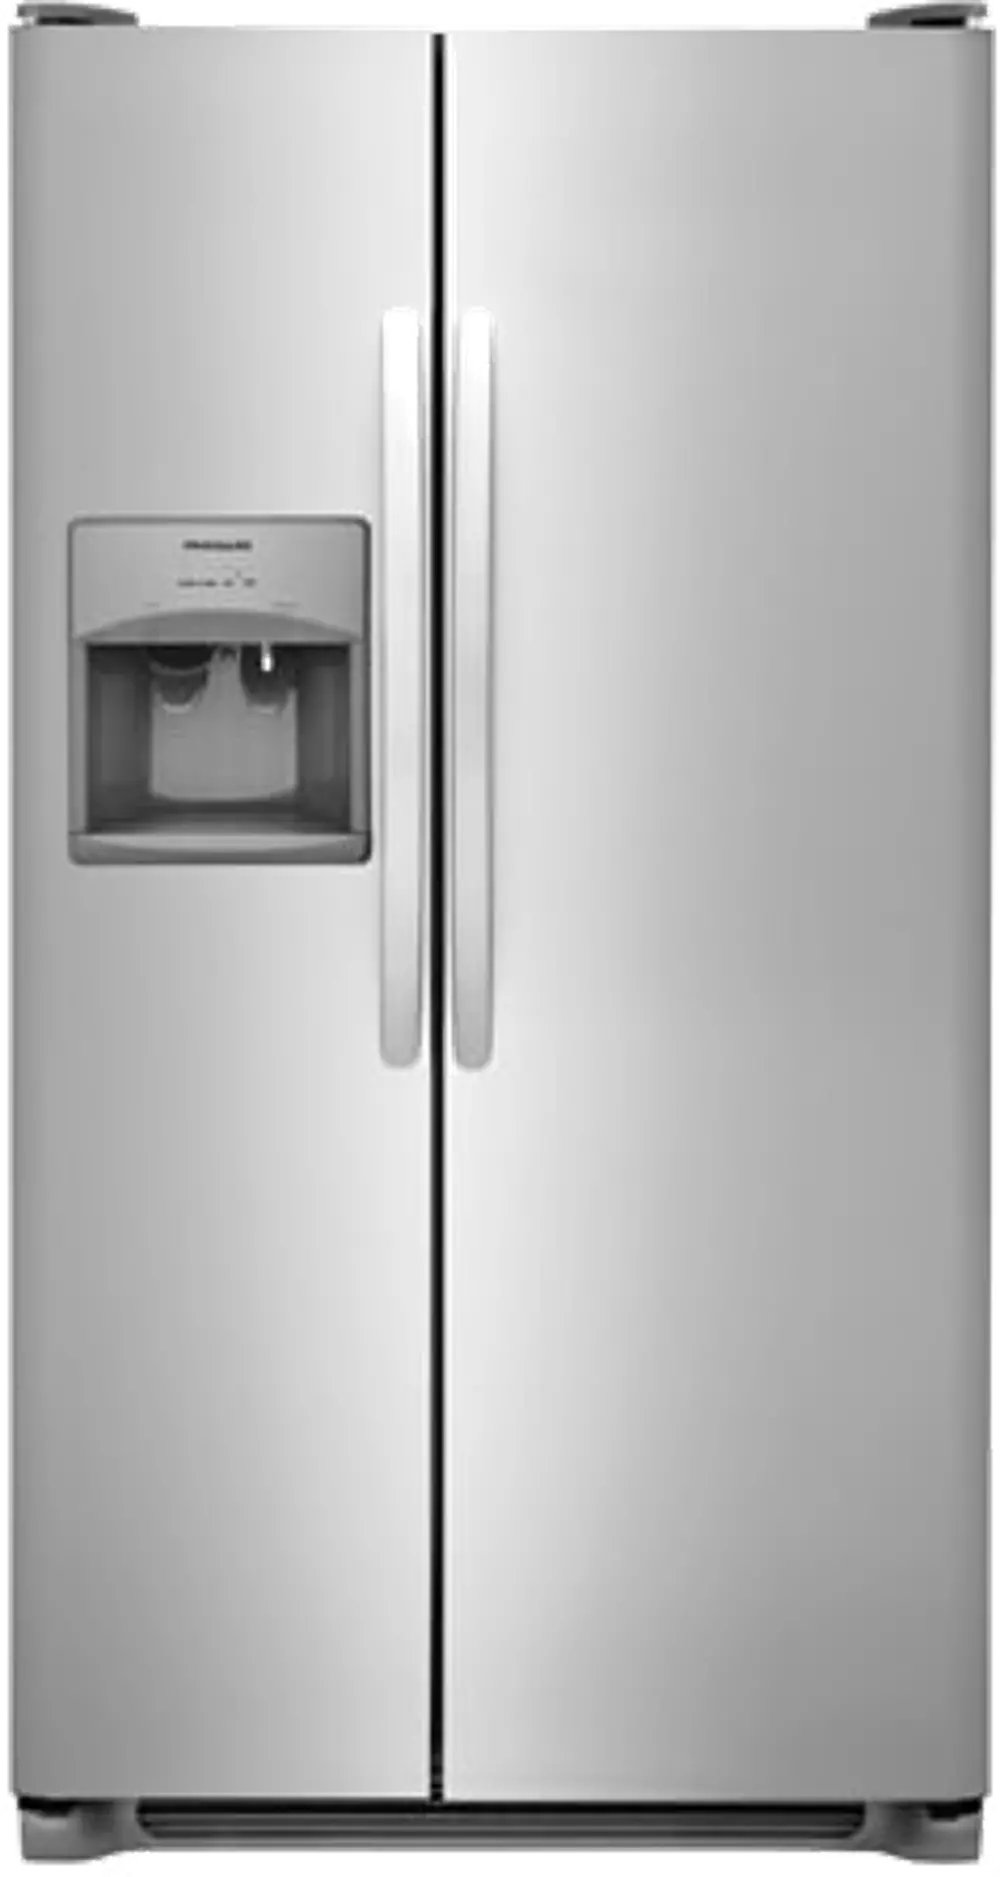 FFSS2615TS Frigidaire 25.5 cu. ft. Side-by-Side Refrigerator - 36 Inch Stainless Steel-1